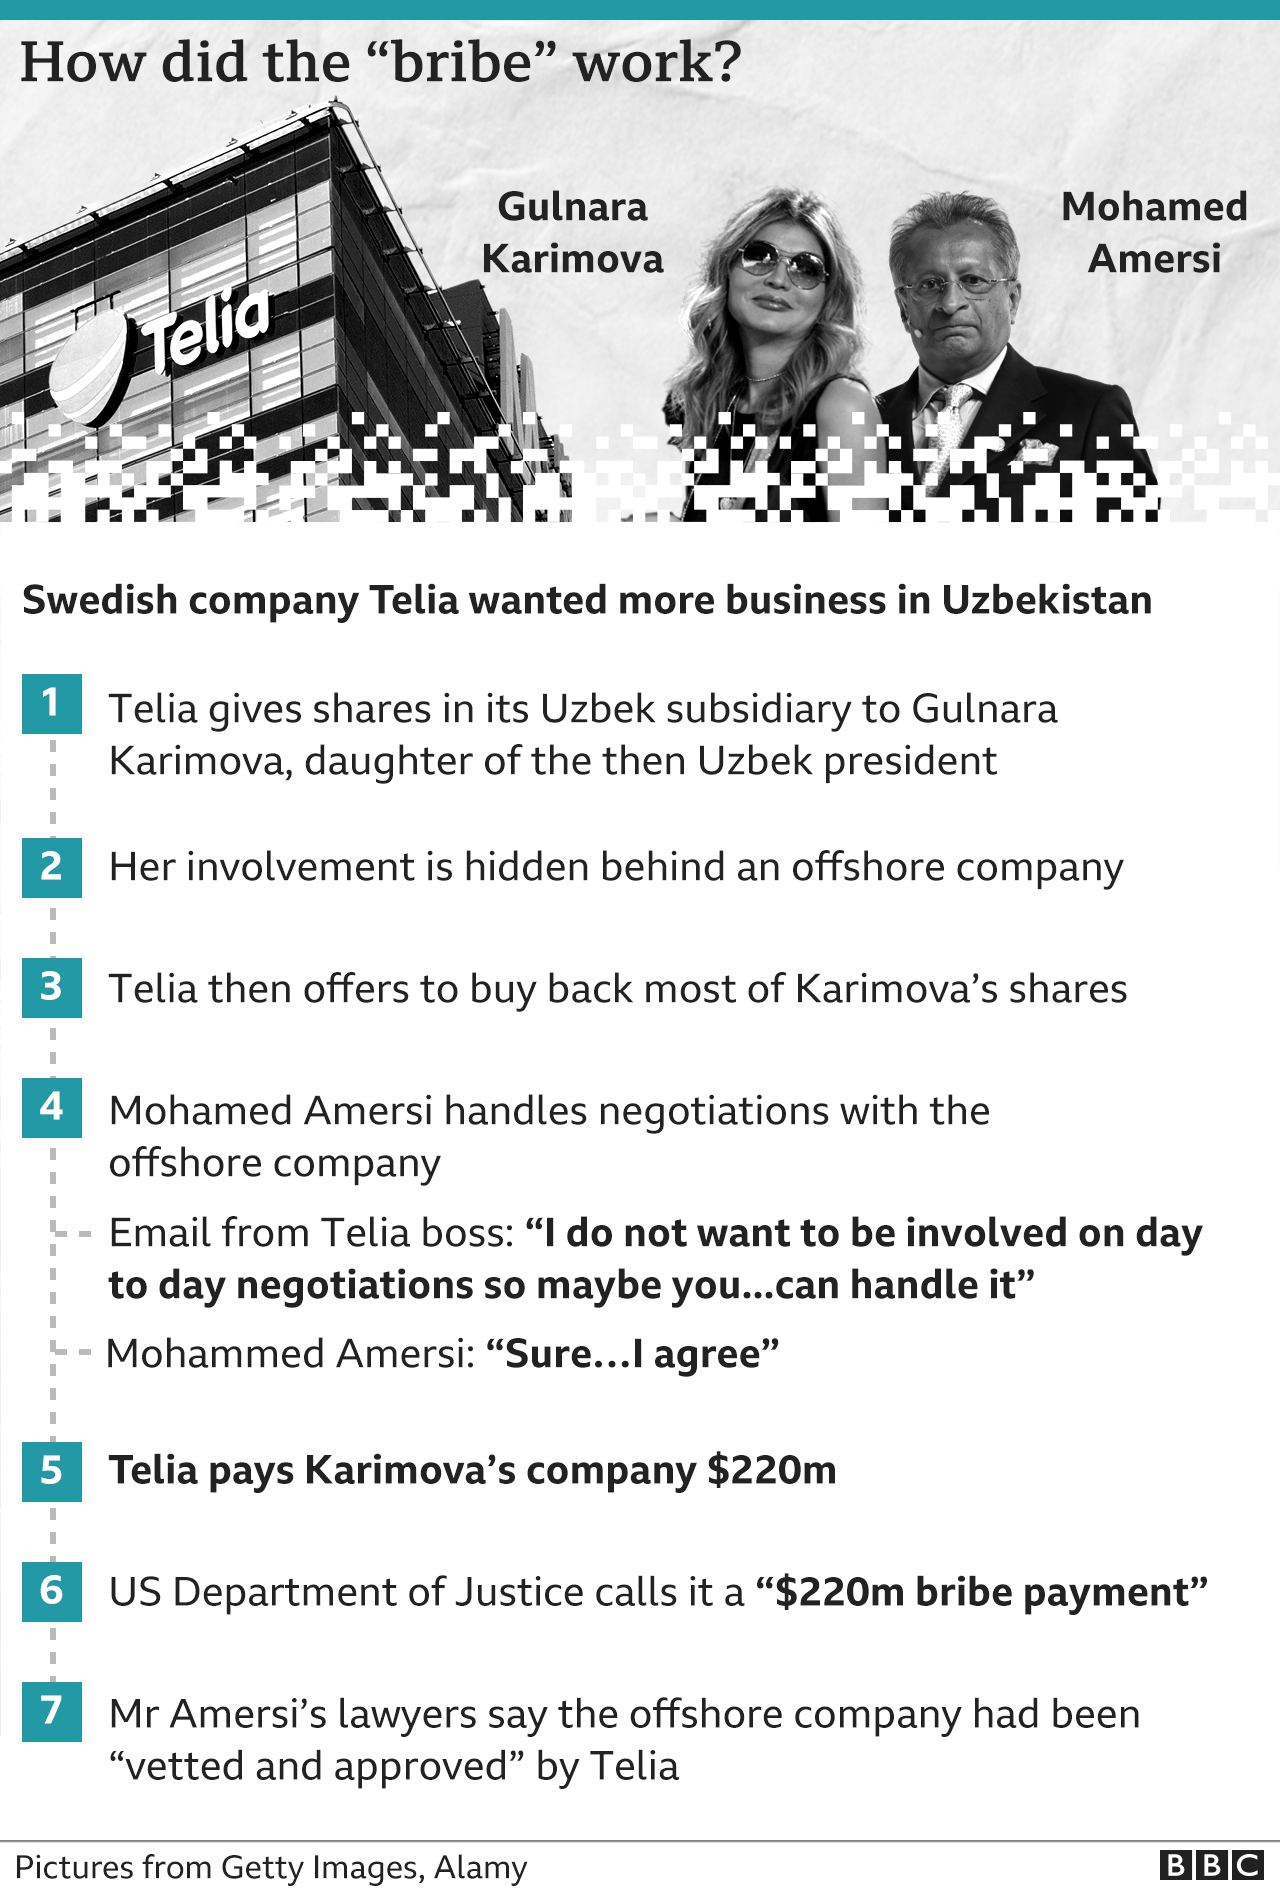 Graphic showing how the case involving Mohamed Amersi and the Uzbek deal played out